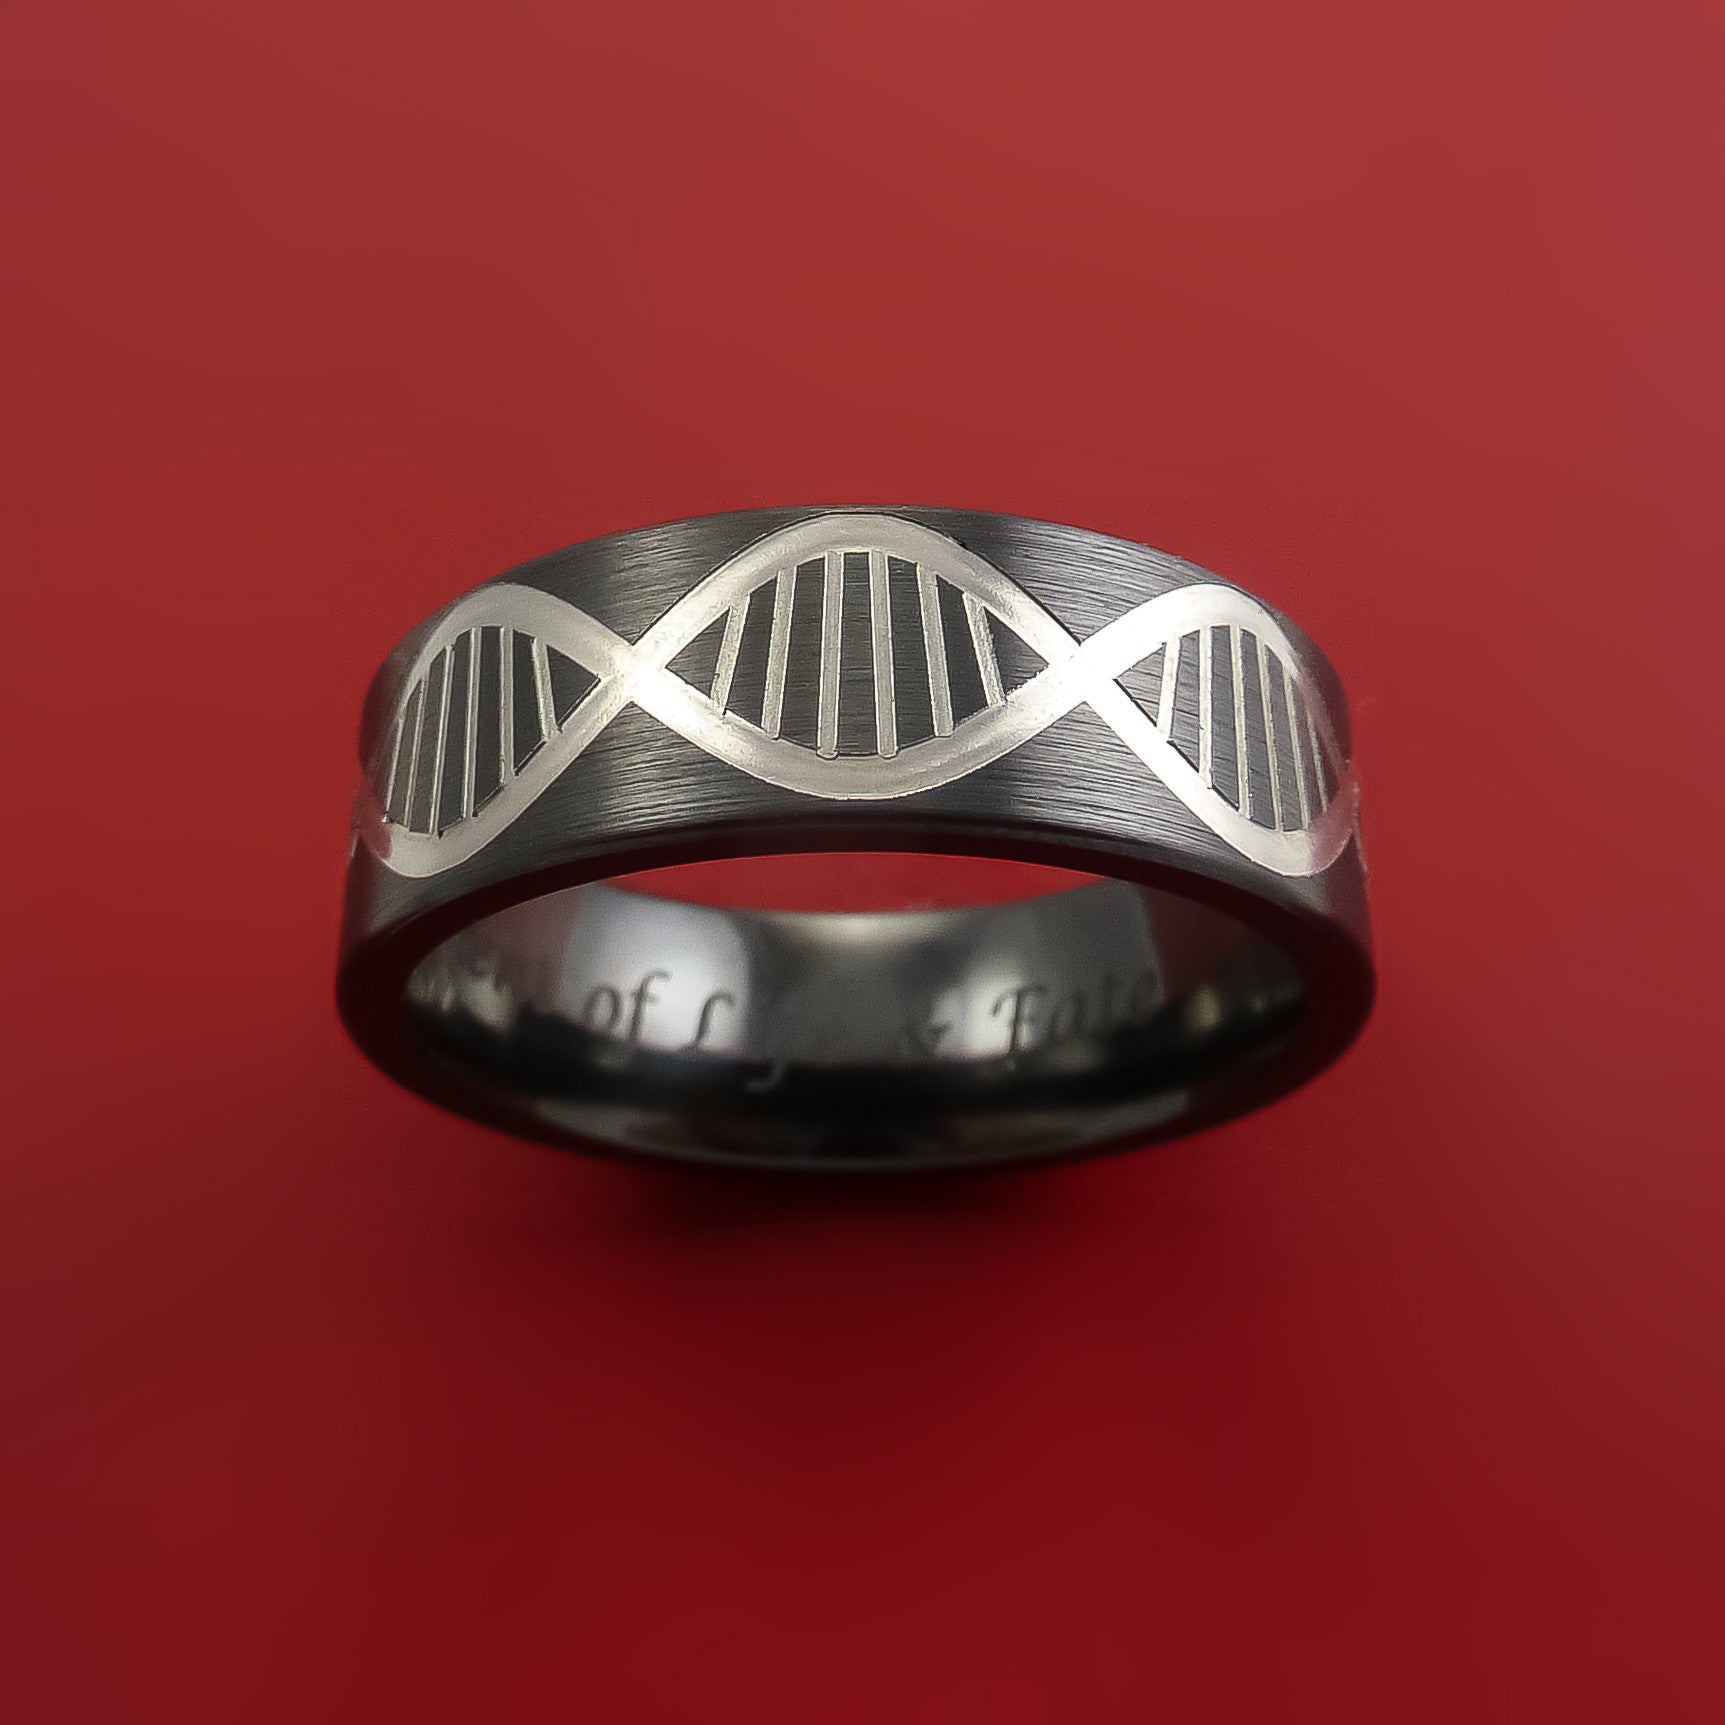 DNA ring in 14K solid gold – sciencejewelry1824